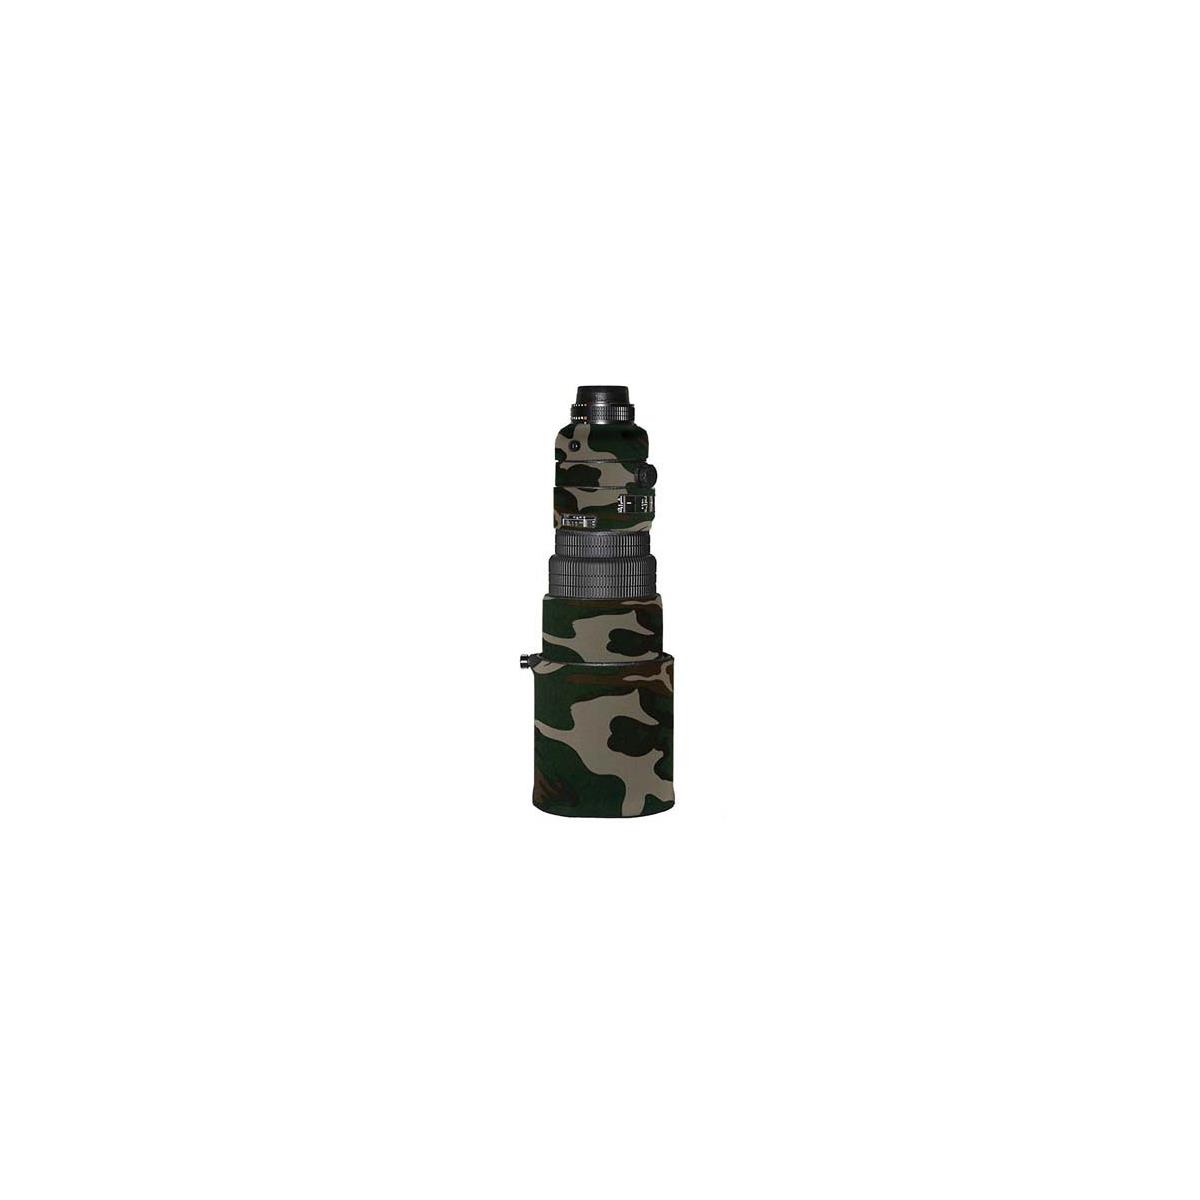 Image of LensCoat for the Nikon 300mm f/2.8 AFS I Lens - Forest Green Woodland Camo